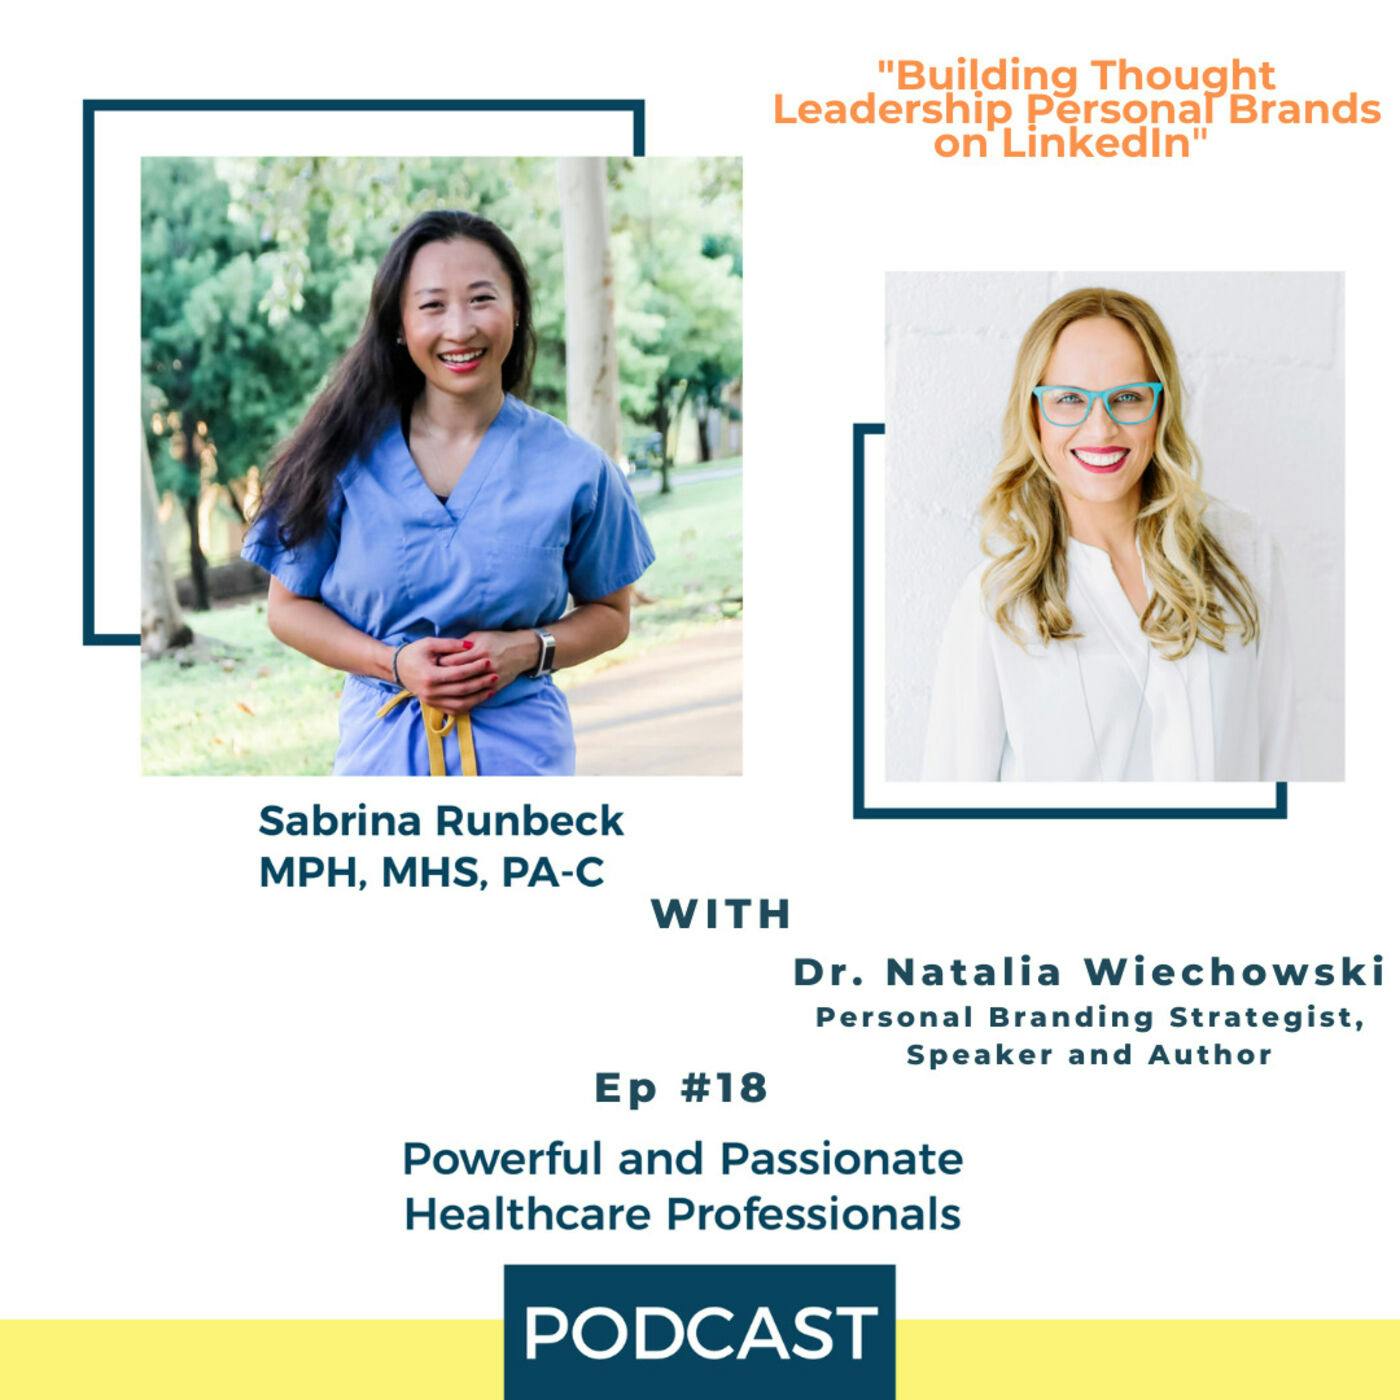 Ep 18 – Building Thought Leadership Personal Brands on LinkedIn with Dr. Natalia